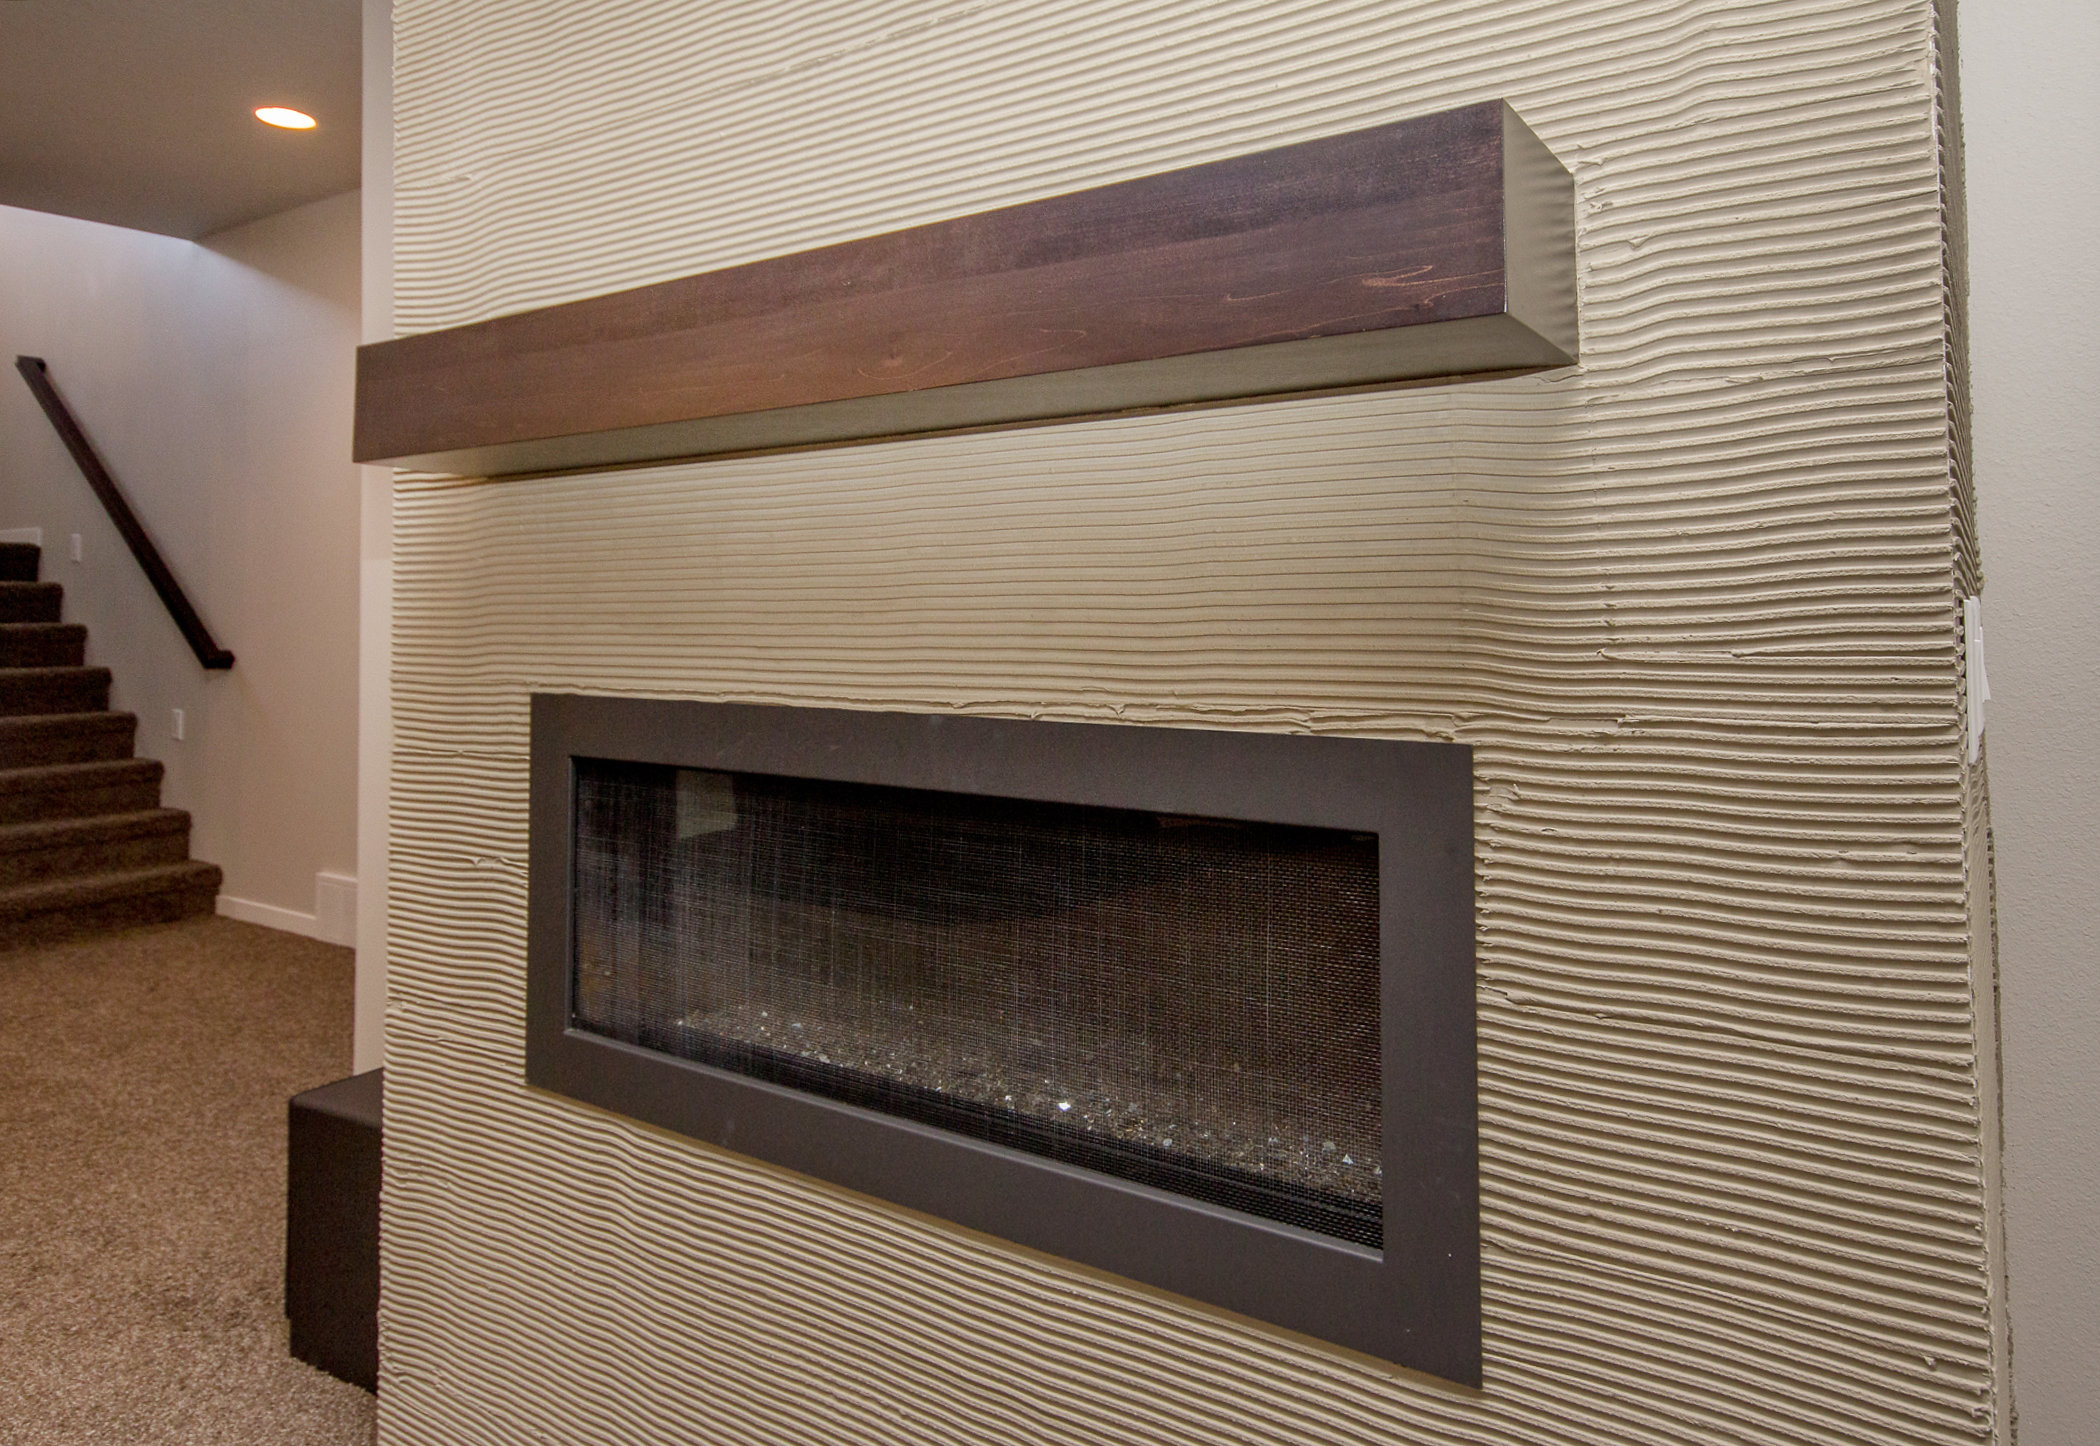 The sky is the limit when it comes to designing and selecting materials for your fireplace